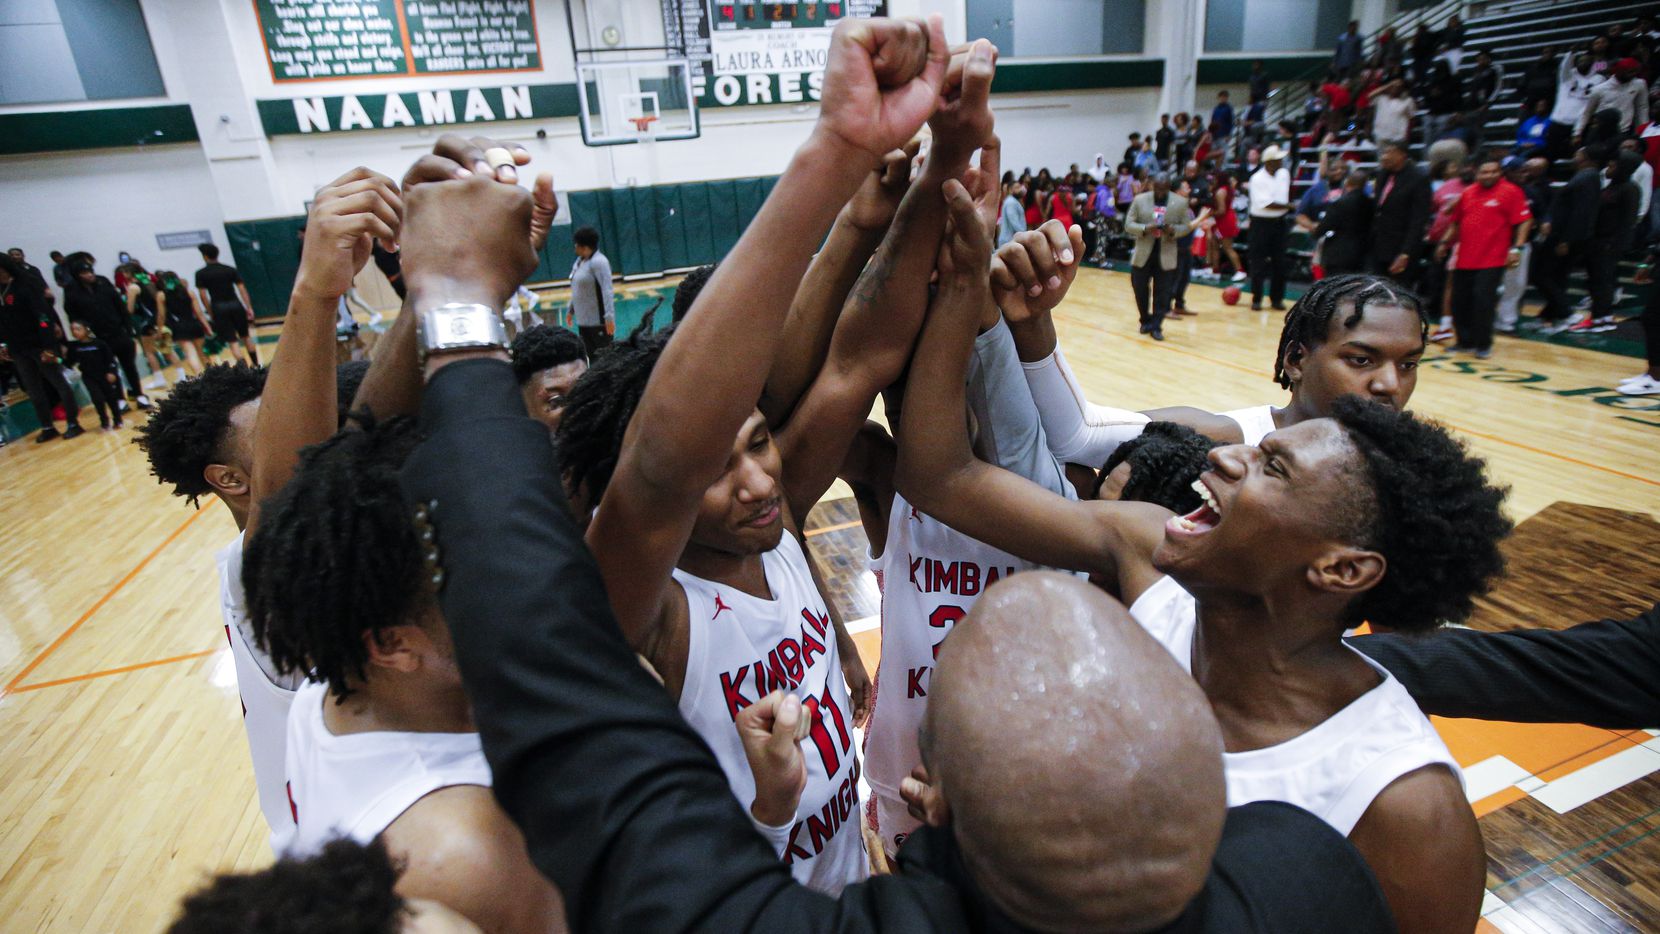 Kimball celebrates a 101-73 win over Newman Smith after a Class 5A Region II quarterfinal boys basketball game at Naaman Forest High School in Garland, Tuesday, March 3, 2020.